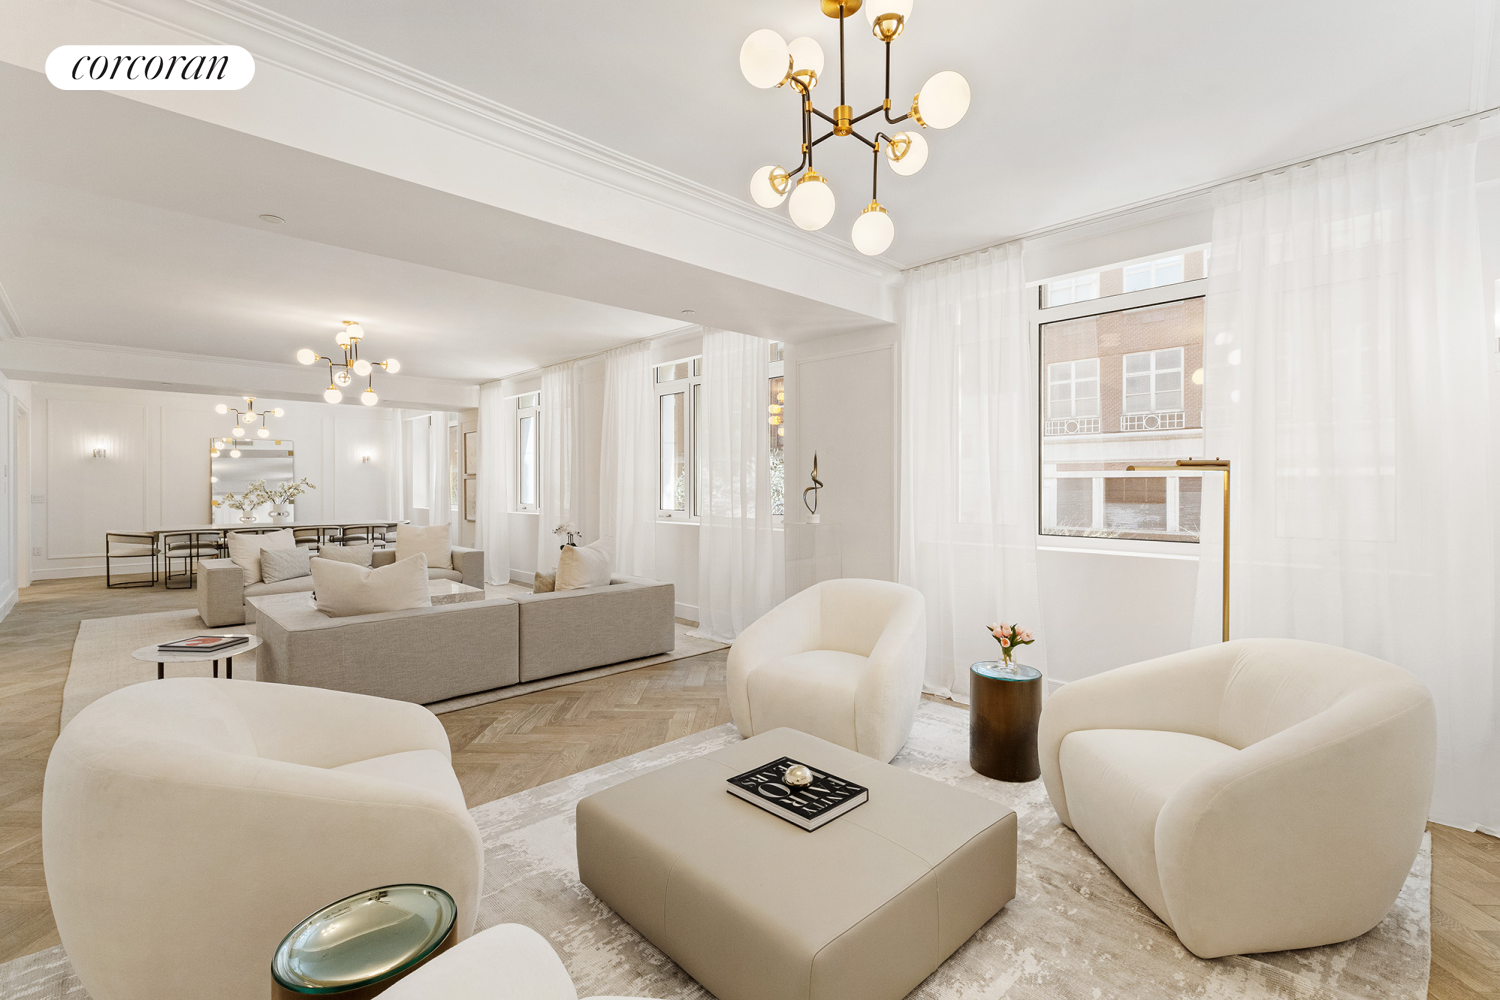 126 East 86th Street 3A, Upper East Side, Upper East Side, NYC - 4 Bedrooms  
3.5 Bathrooms  
6 Rooms - 